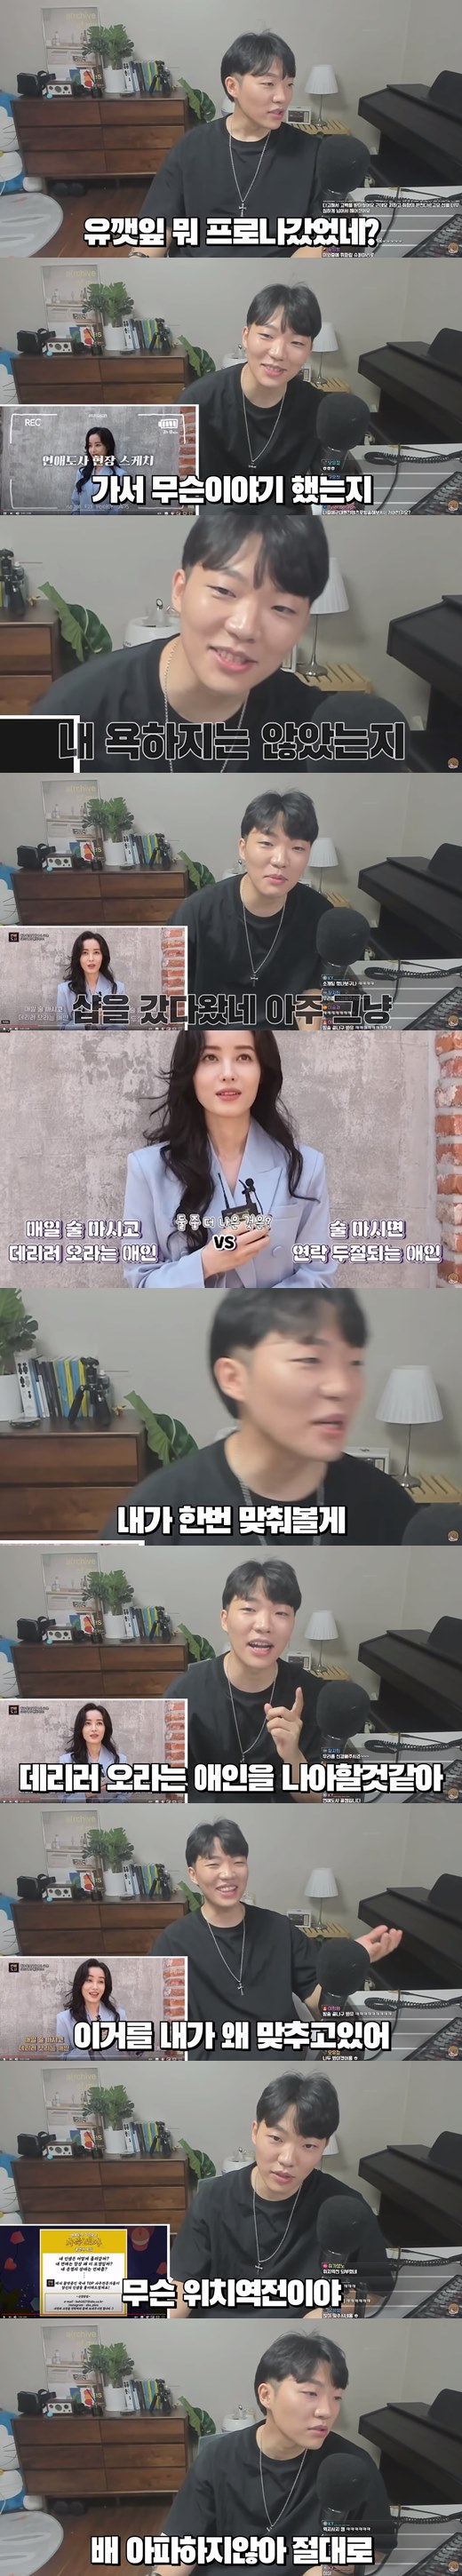 Choi Go-gi said she will not tell about the reunion if she goes out again on Crime Chief TVs We Divorced (hereinafter referred to as Woo Divorce).On the 29th, Choi posted a video titled Earthing the heart of the oil leaf on his YouTube channel.In the public image, Choi read an article that his ex-wife Yu Se-leaf appeared on SBS Plus Love Dosa while watching his article.I do not wonder what you said. What you said. Did not you swear at me?Then, when I saw the leaves of the oil in the broadcast, I laughed, saying, What did you decorate like this? I went to the shop, the shop.Choi said he would try to guess what he would do by watching the oil leaves playing balance games on the air.First, the question was Moy Yat drink and come to pick me up and lover that is lost when you drink.The best chose Moy Yat drink and come to pick me up, and the oily leaves chose the same answer as the best.It suits the TV program well, its like a celebrity because it wears like that, said Choi.The location reversed was the netizens saying, What is the location reversed? I do not feel sick.I really want to have sesame leaves all the time, he said. I always go out and tell you about me.I sometimes post videos about sesame leaves and say, I use my ex-wife for broadcasting. In fact, it is a thankful act for broadcasters to mention each other.The parties say it is okay, but if a third party says so, we are uncomfortable. Also, when I look at the leaves of the oil, the best is a lot of cool, I want to get a lot of this, I think I will take care of it.If I go back to time and go to Woori Hon, I do not talk about reunion, I just want to show you how well I am.I hope both work out, he said.On the other hand, Choi, along with his ex-wife, Yu-se-leaf, appeared on the Crime Chief TV Chosun entertainment program We Divorced.